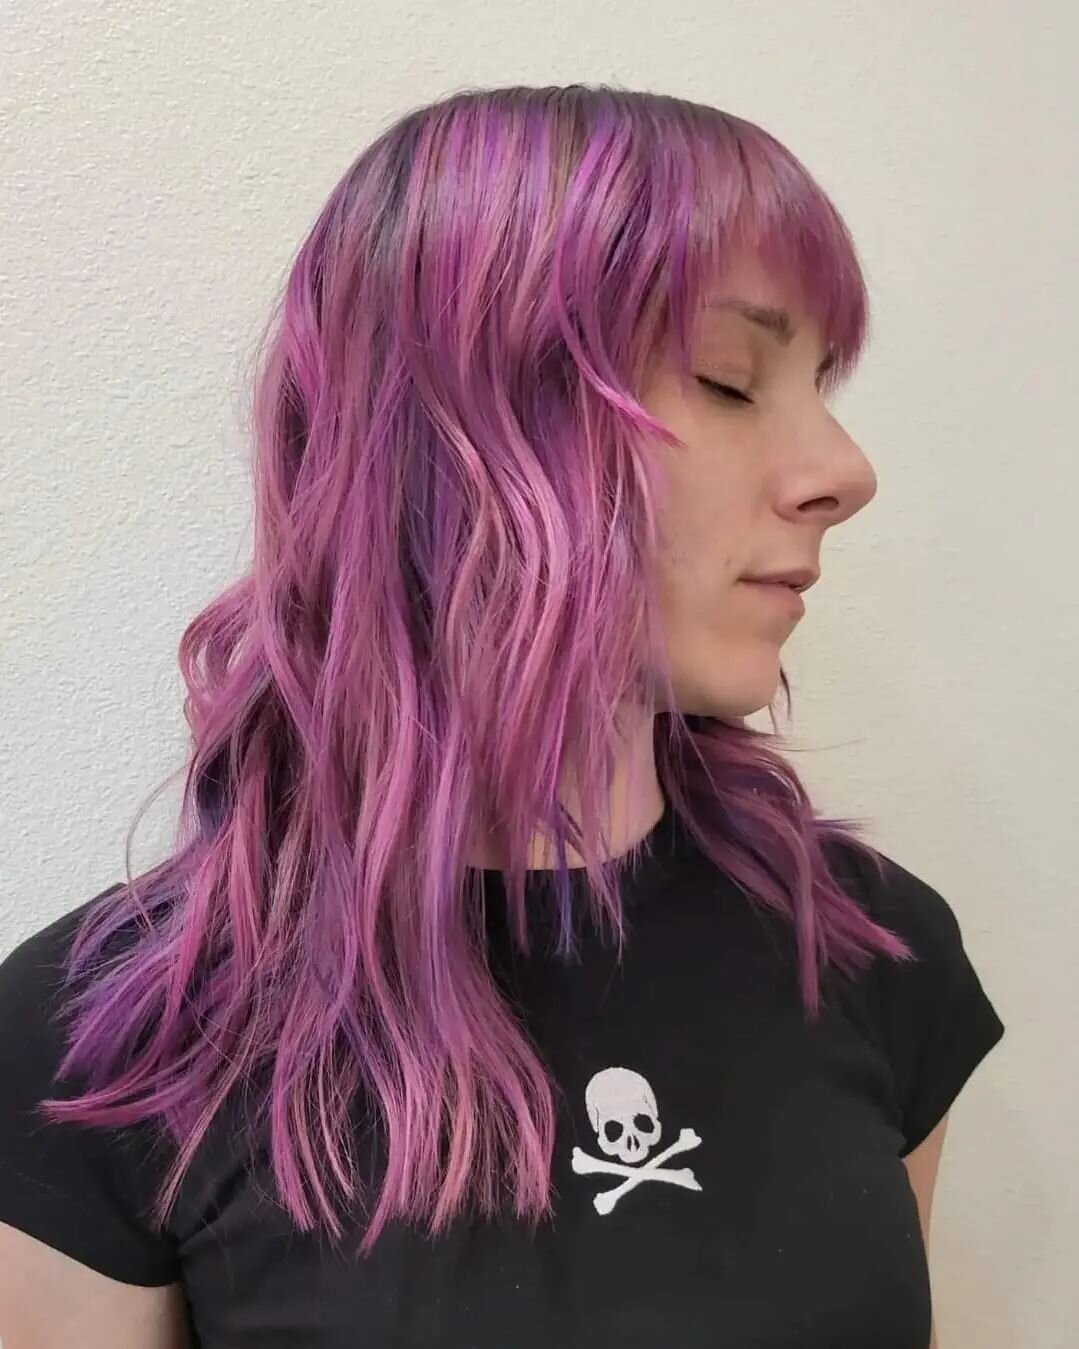 Another Look at one of my favorites! 
PINK AND PURPLE! 🥰
&bull;
&bull;
Looking forward to getting back to my Fun Creative side of hair! 
I would Love Love to do some more fun Cuts and Vivids, Unicorn, Rainbow, Kaleidoscope, Pastels, Color Block, Spl